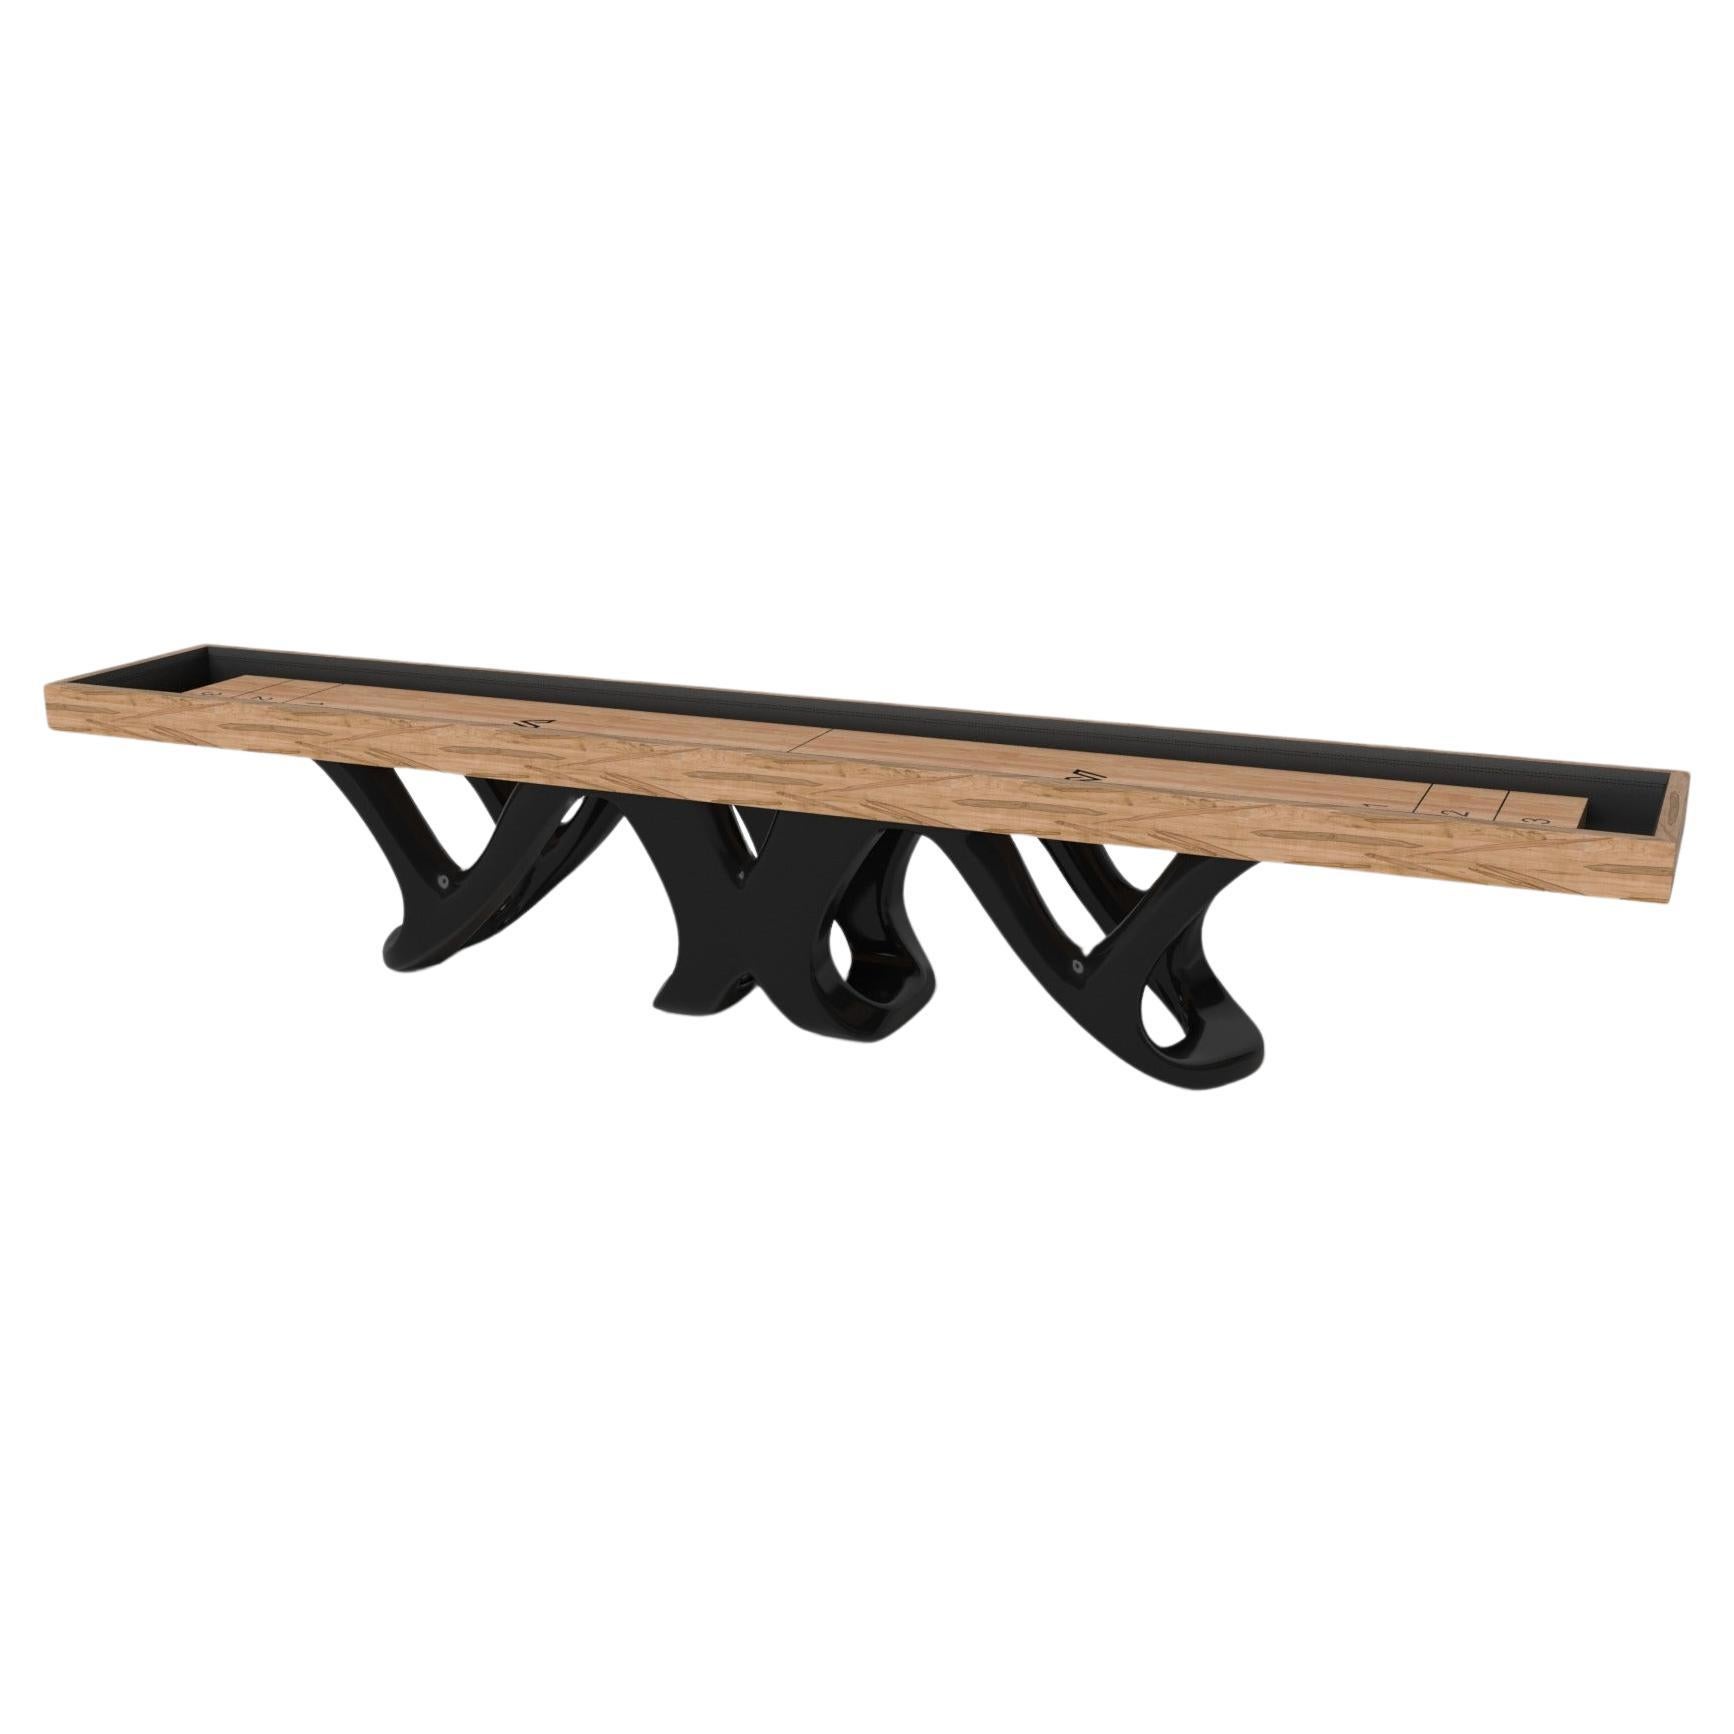 Elevate Customs Draco Shuffleboard Tables / Solid Curly Maple Wood in 16' - USA